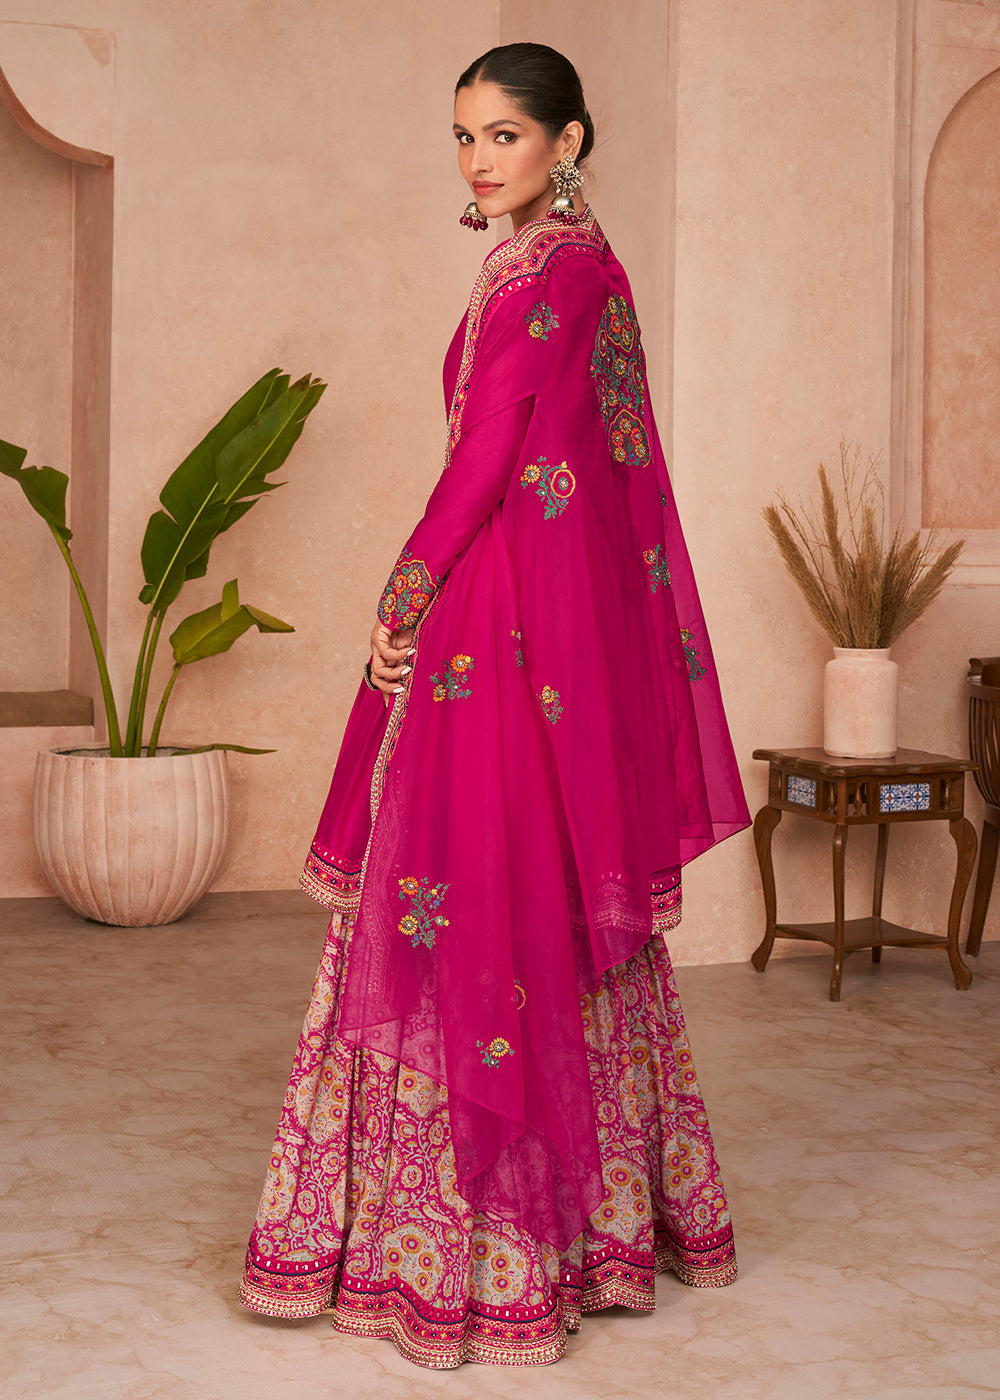 Shop Now Princess Pink Multi Thread Embroidered Designer Gharara Suit Online at Empress Clothing in USA, UK, Canada, Italy & Worldwide.